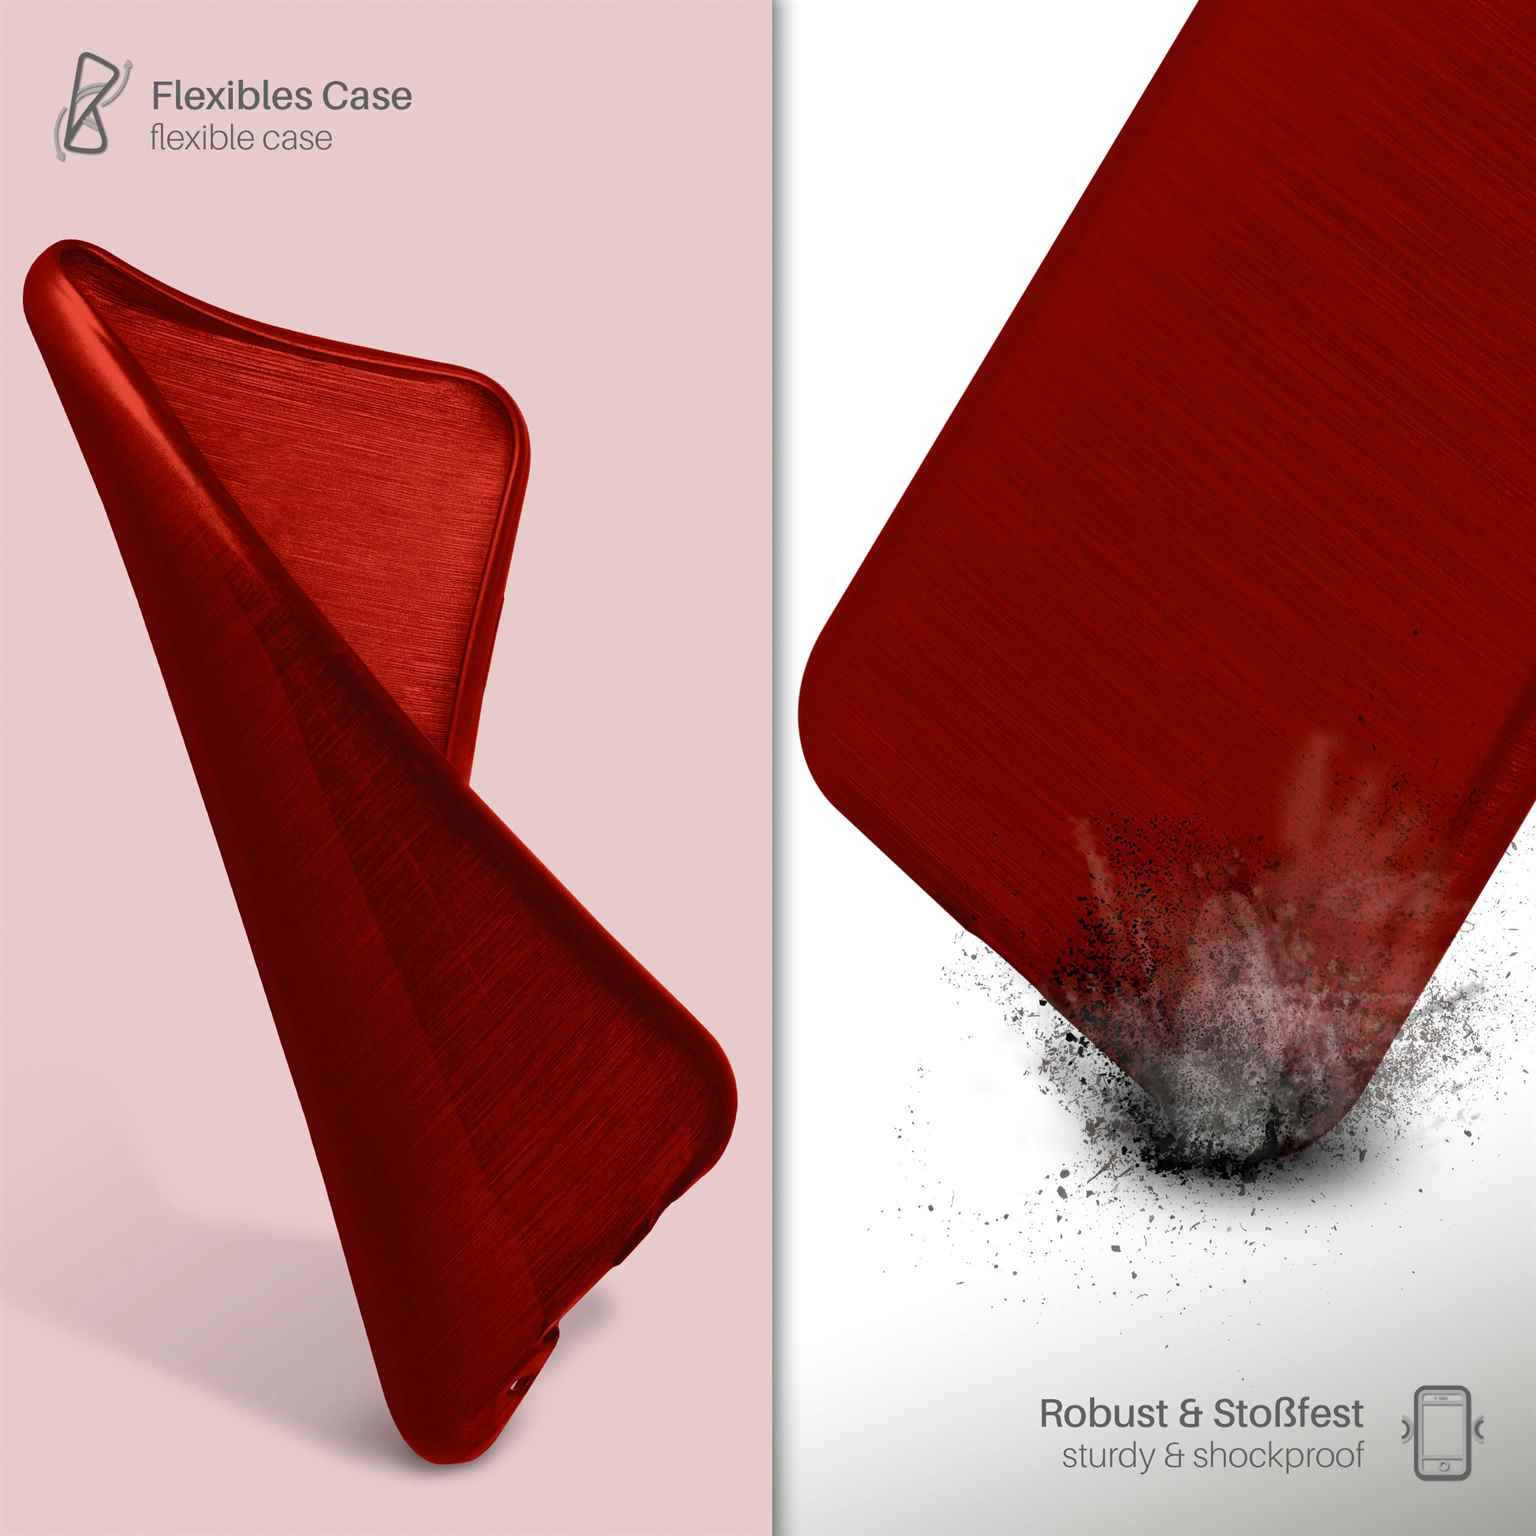 MOEX Brushed Case, Backcover, iPhone 4, Apple, Crimson-Red